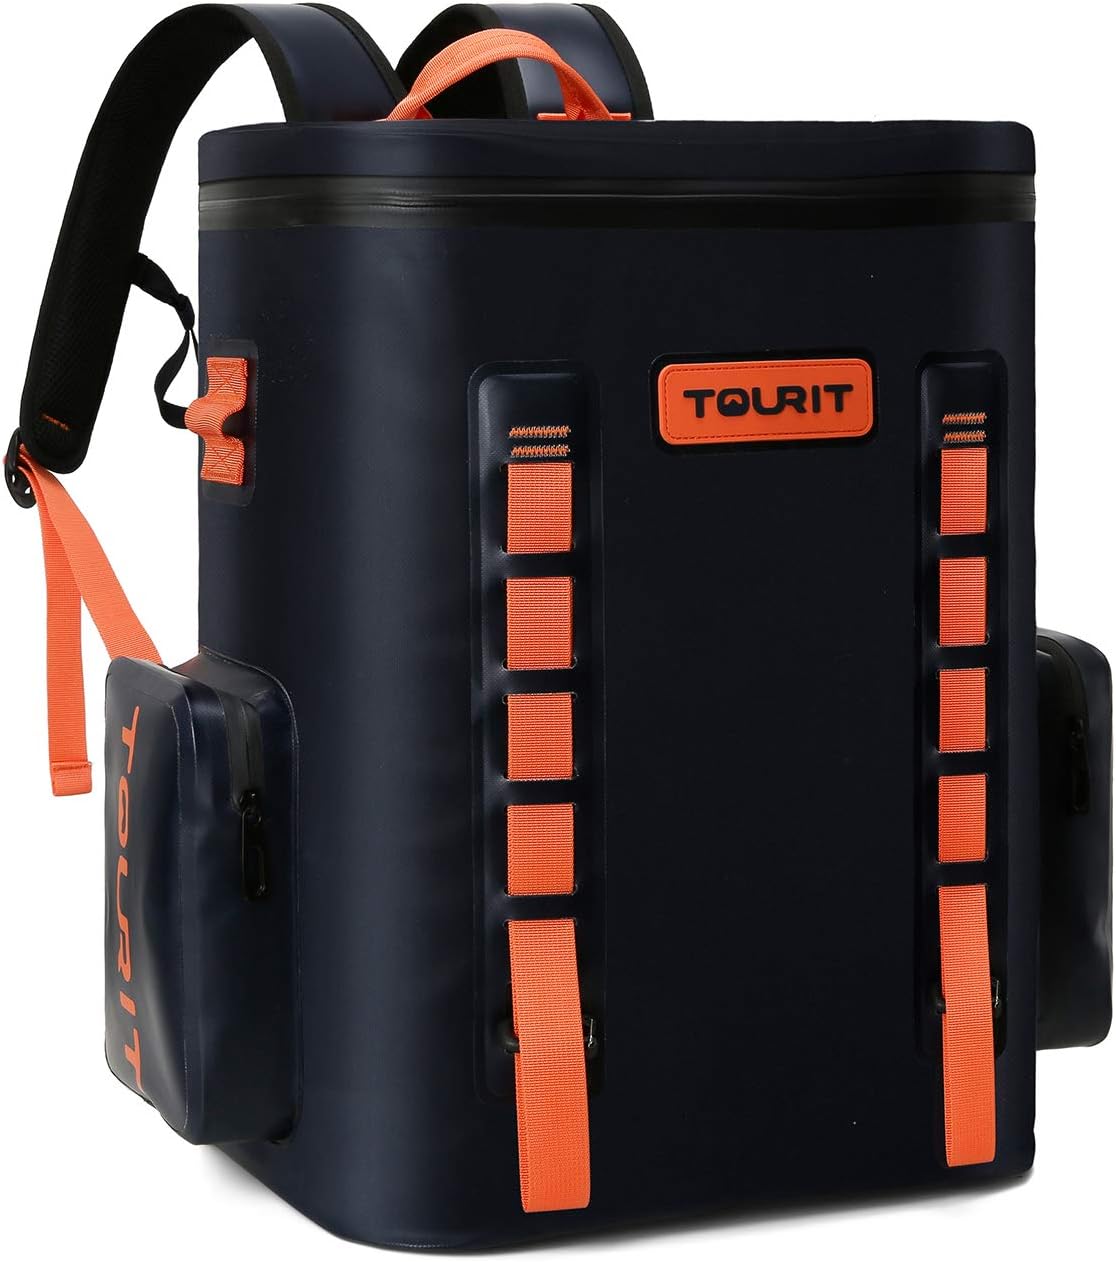 TOURIT vs Yeti Hopper Soft Sided Coolers Which Is The Better Value Cooler